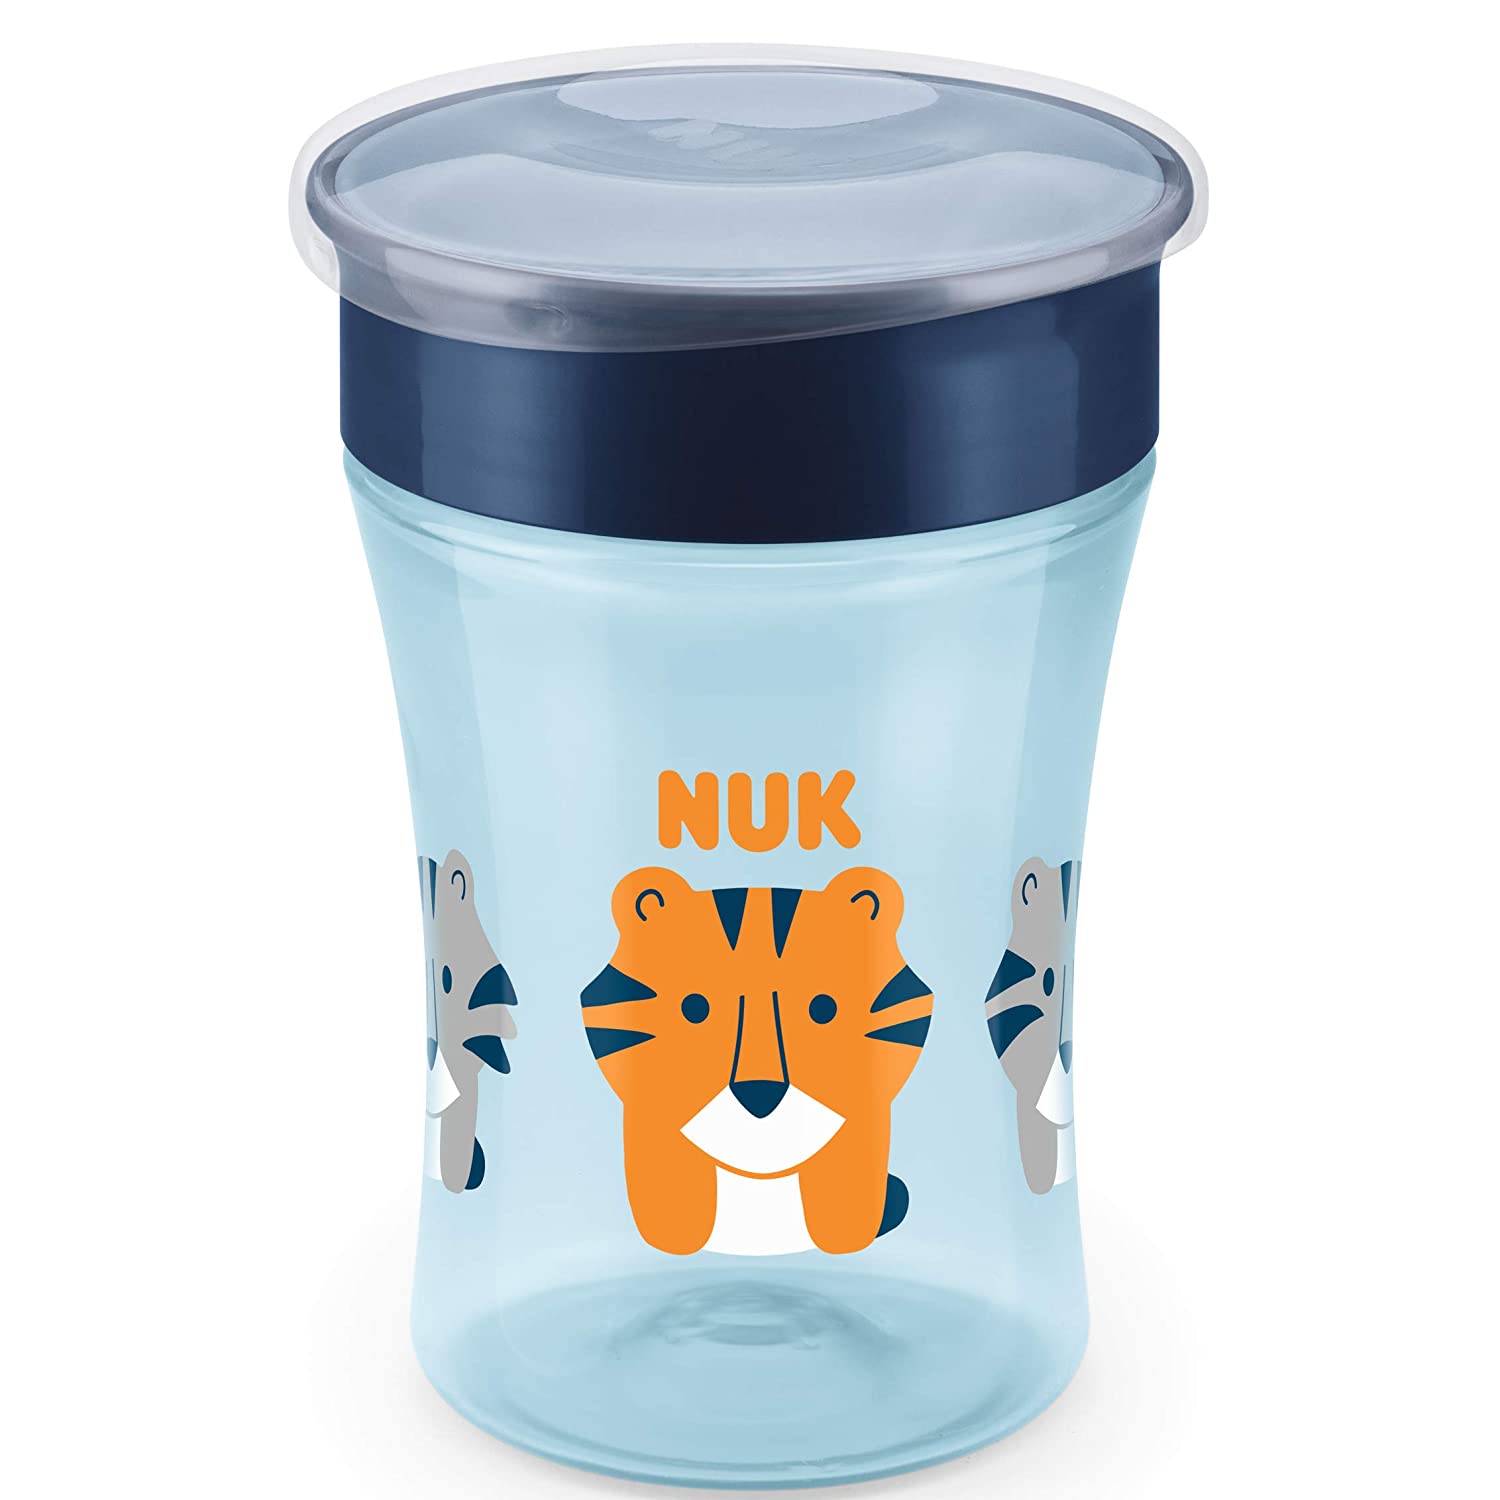 NUK Magic Cup drinking cup, 360 ° drinking rim, leak-proof silicone disc, 8+ months, BPA-free, tiger (blue), 230 ml